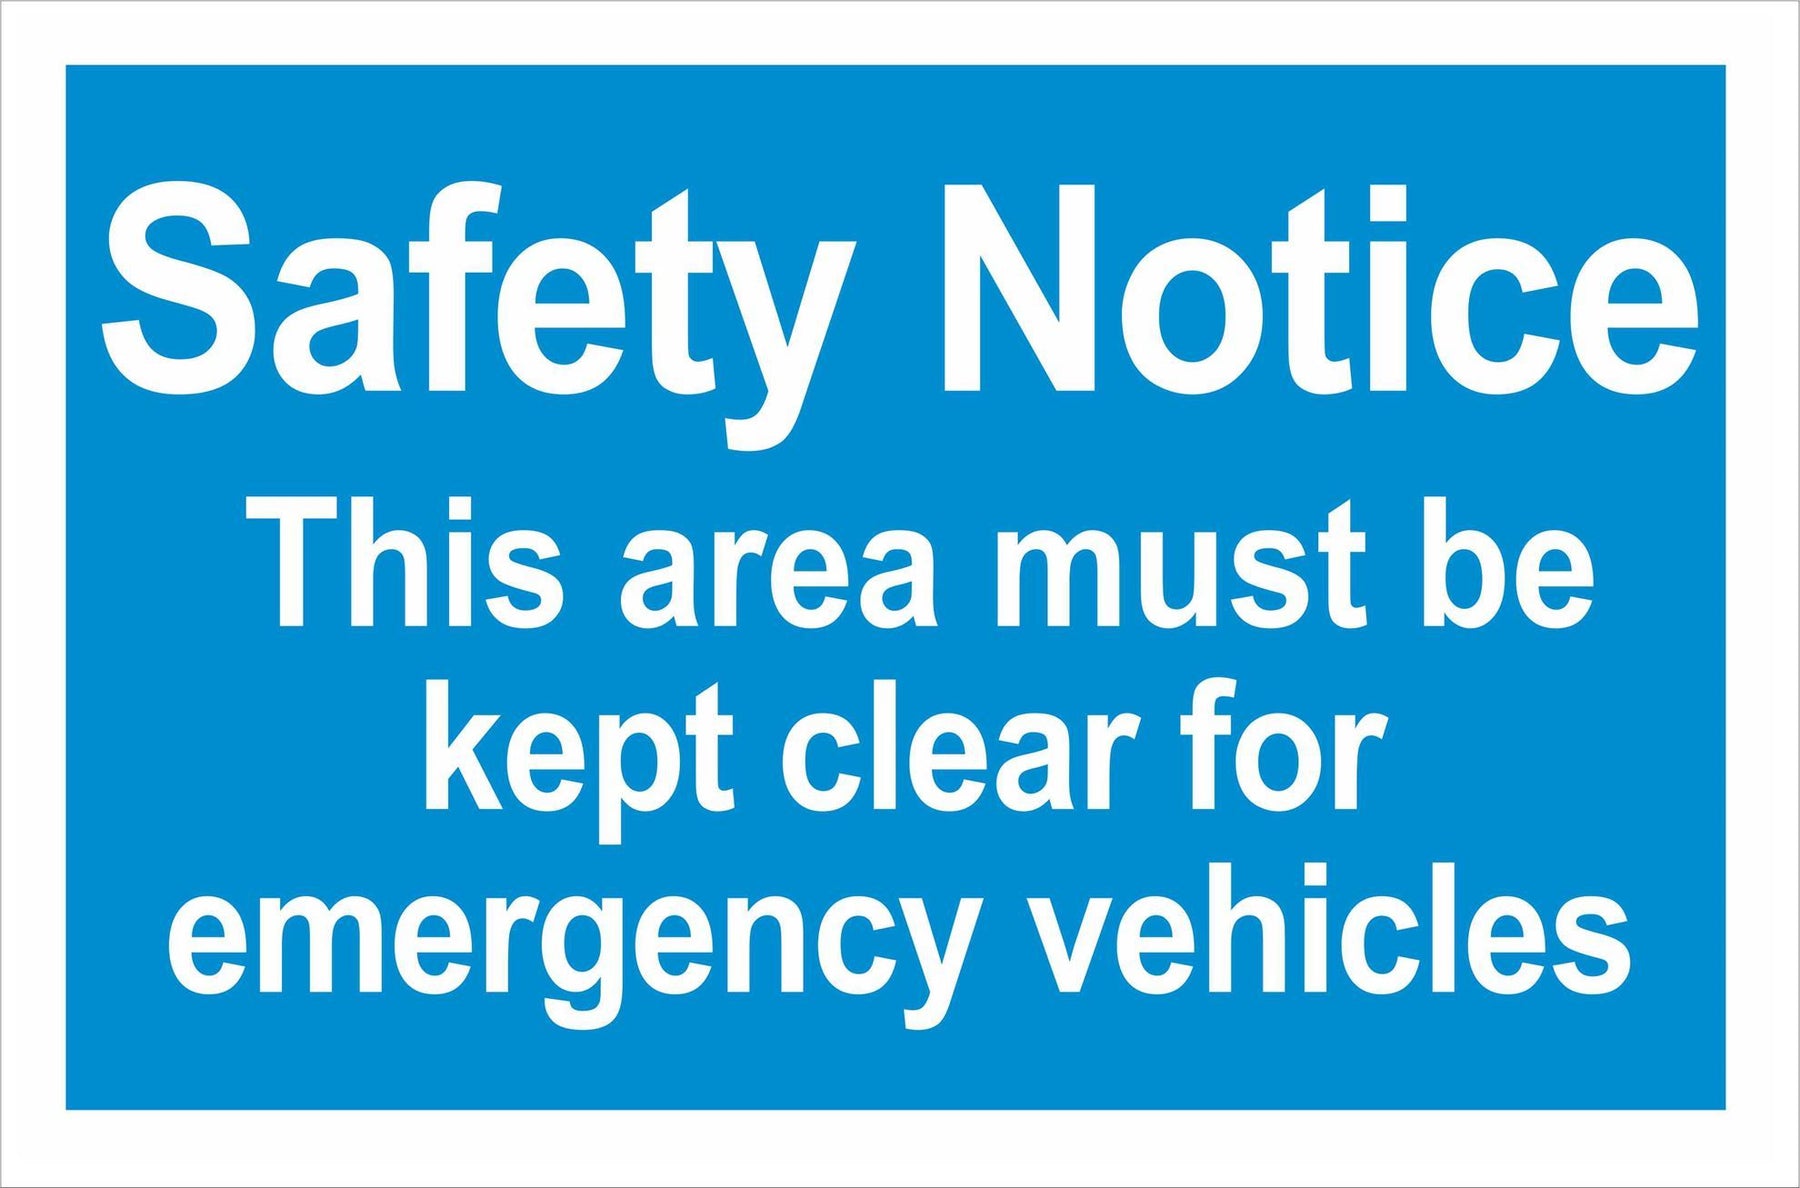 Safety Notice This area must be kept clear for emergency vehicles